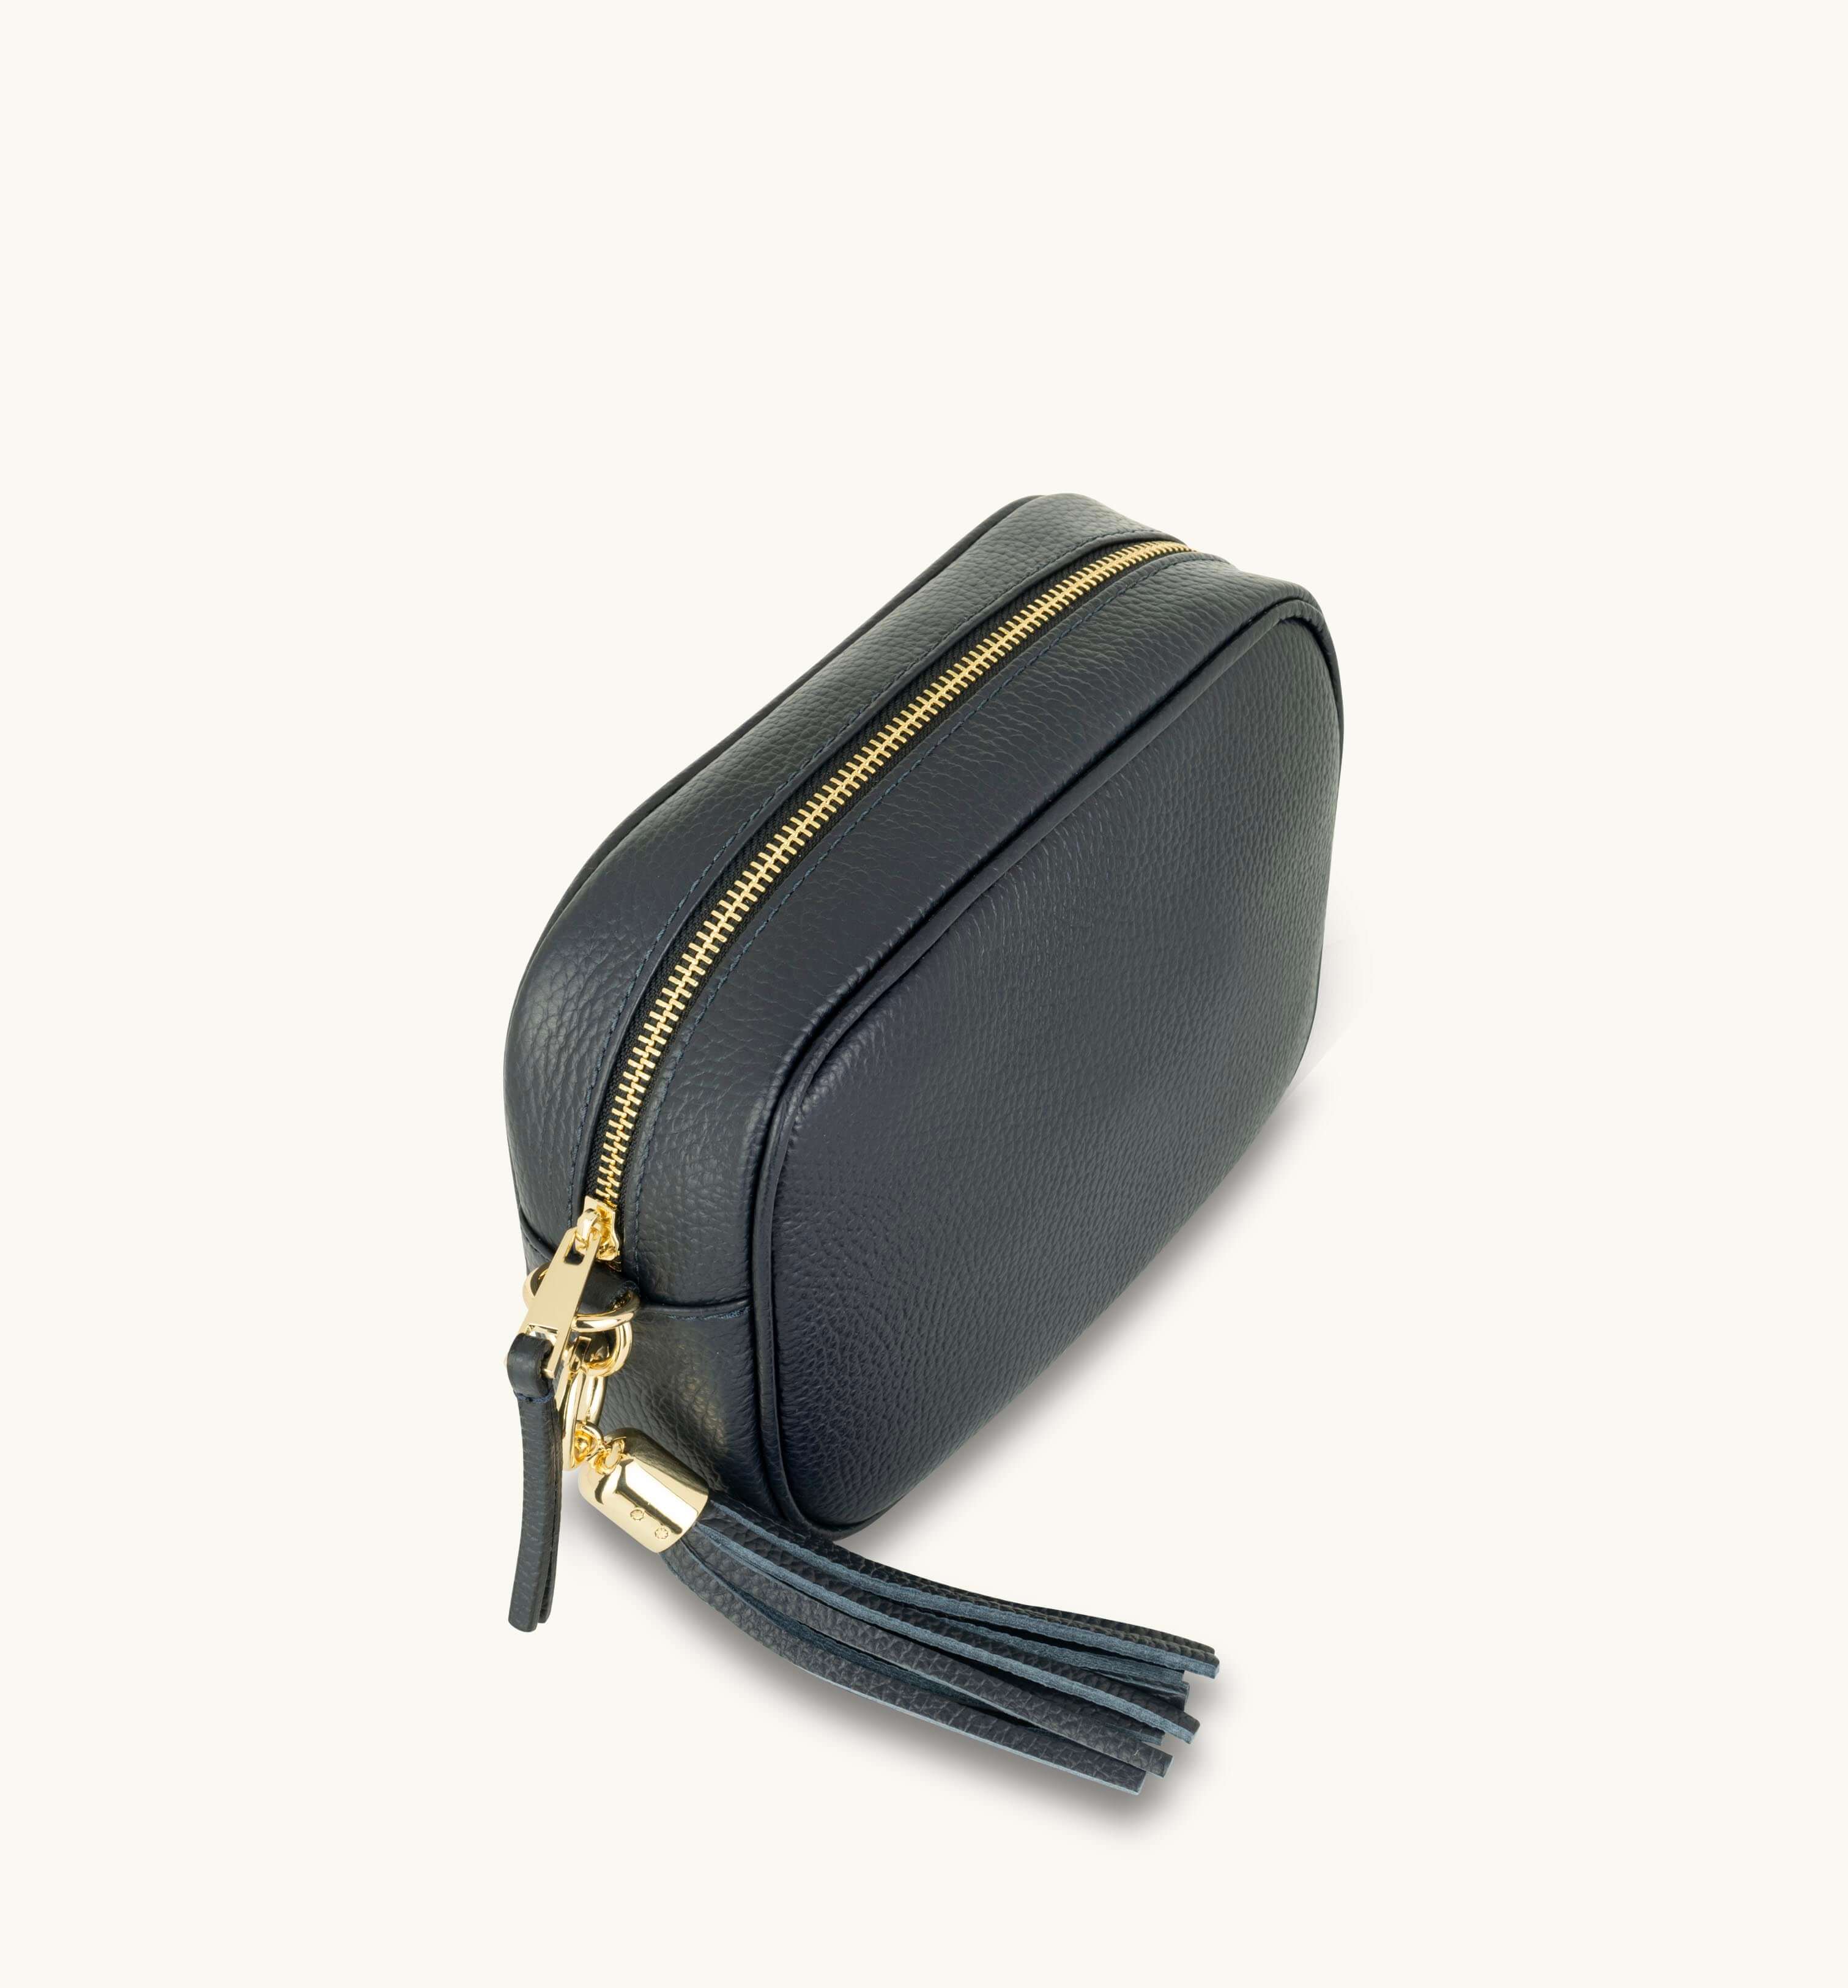 Navy Leather Crossbody Bag With Gold Chain Strap